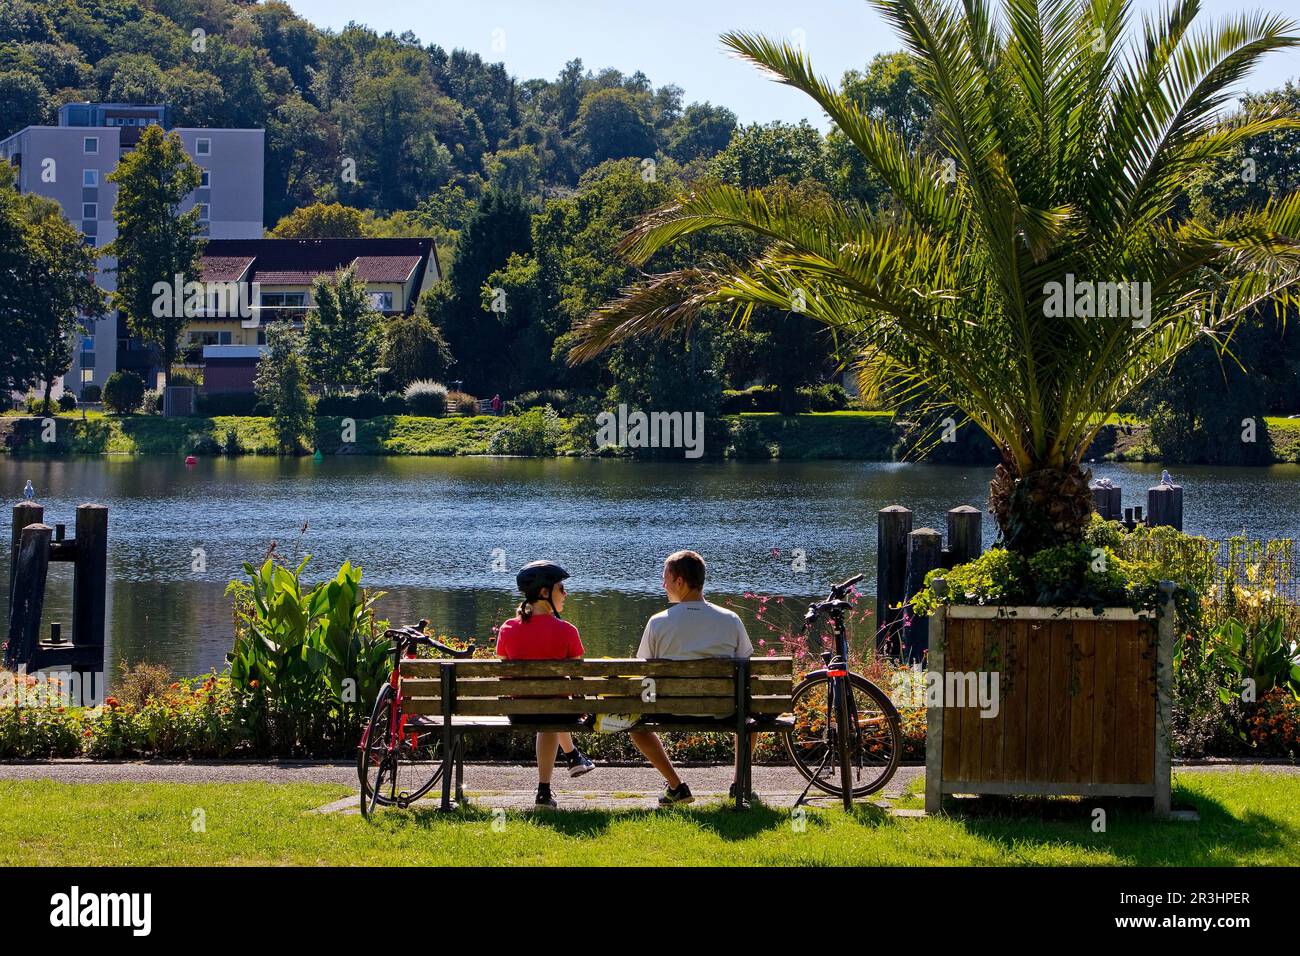 Cyclists on the Ruhr Valley Cycle Path with palm trees, reservoir, Kettwig, Essen, Germany, Europe Stock Photo